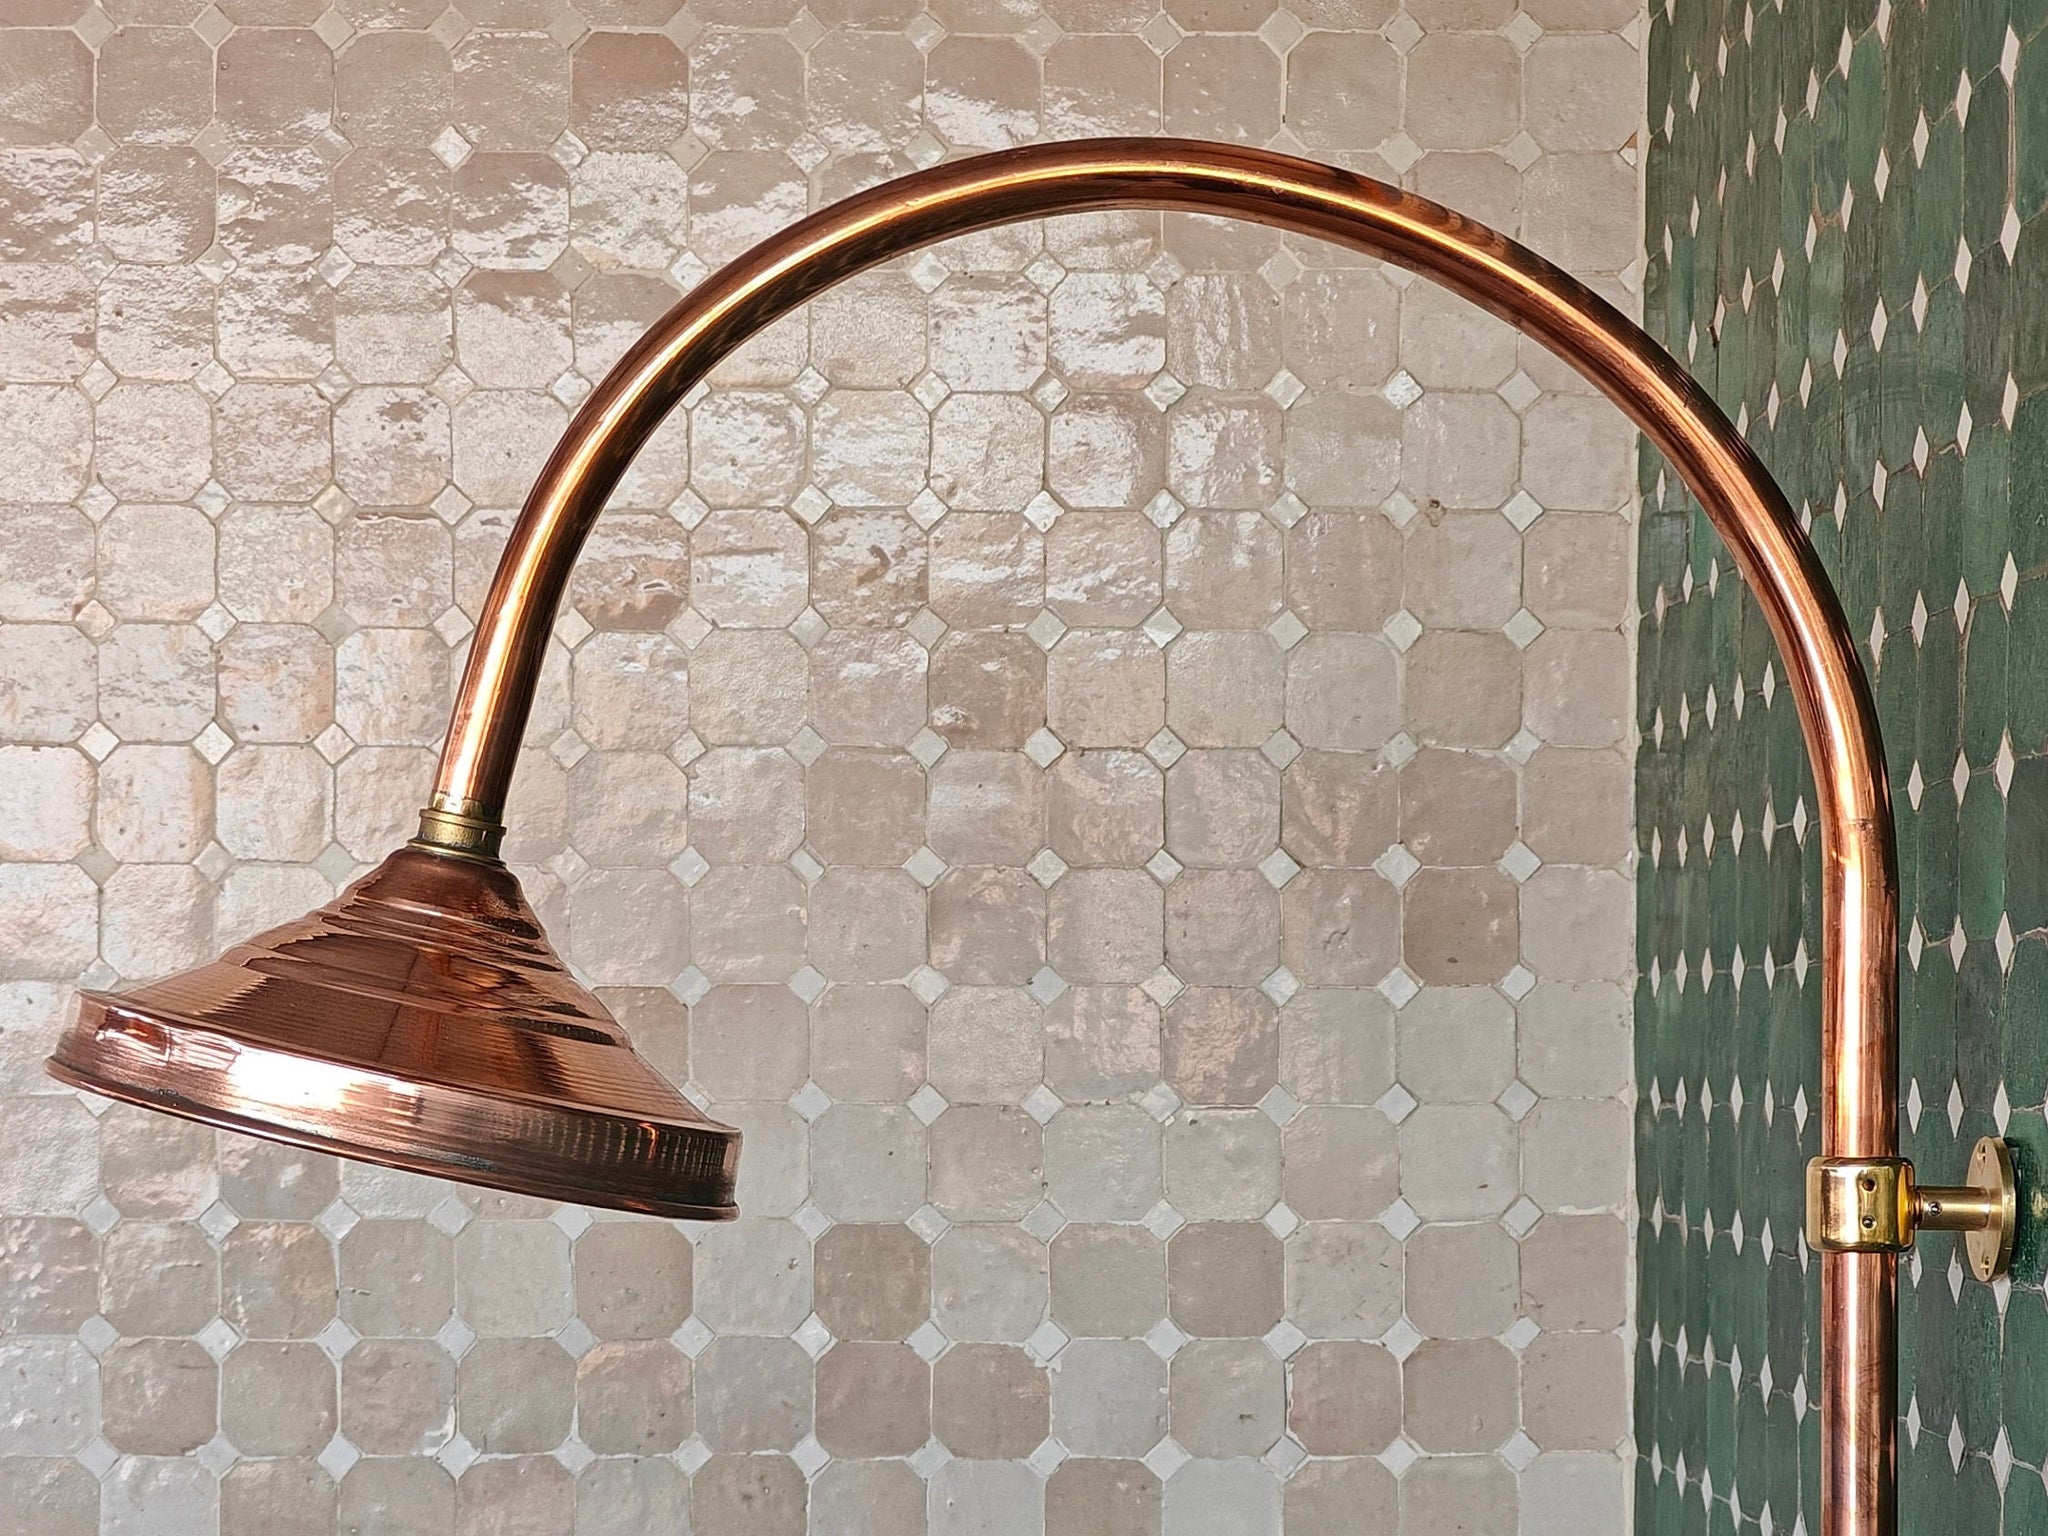 Solid Brass Exposed Shower System, Bathroom Shower System With Rainfall Shower